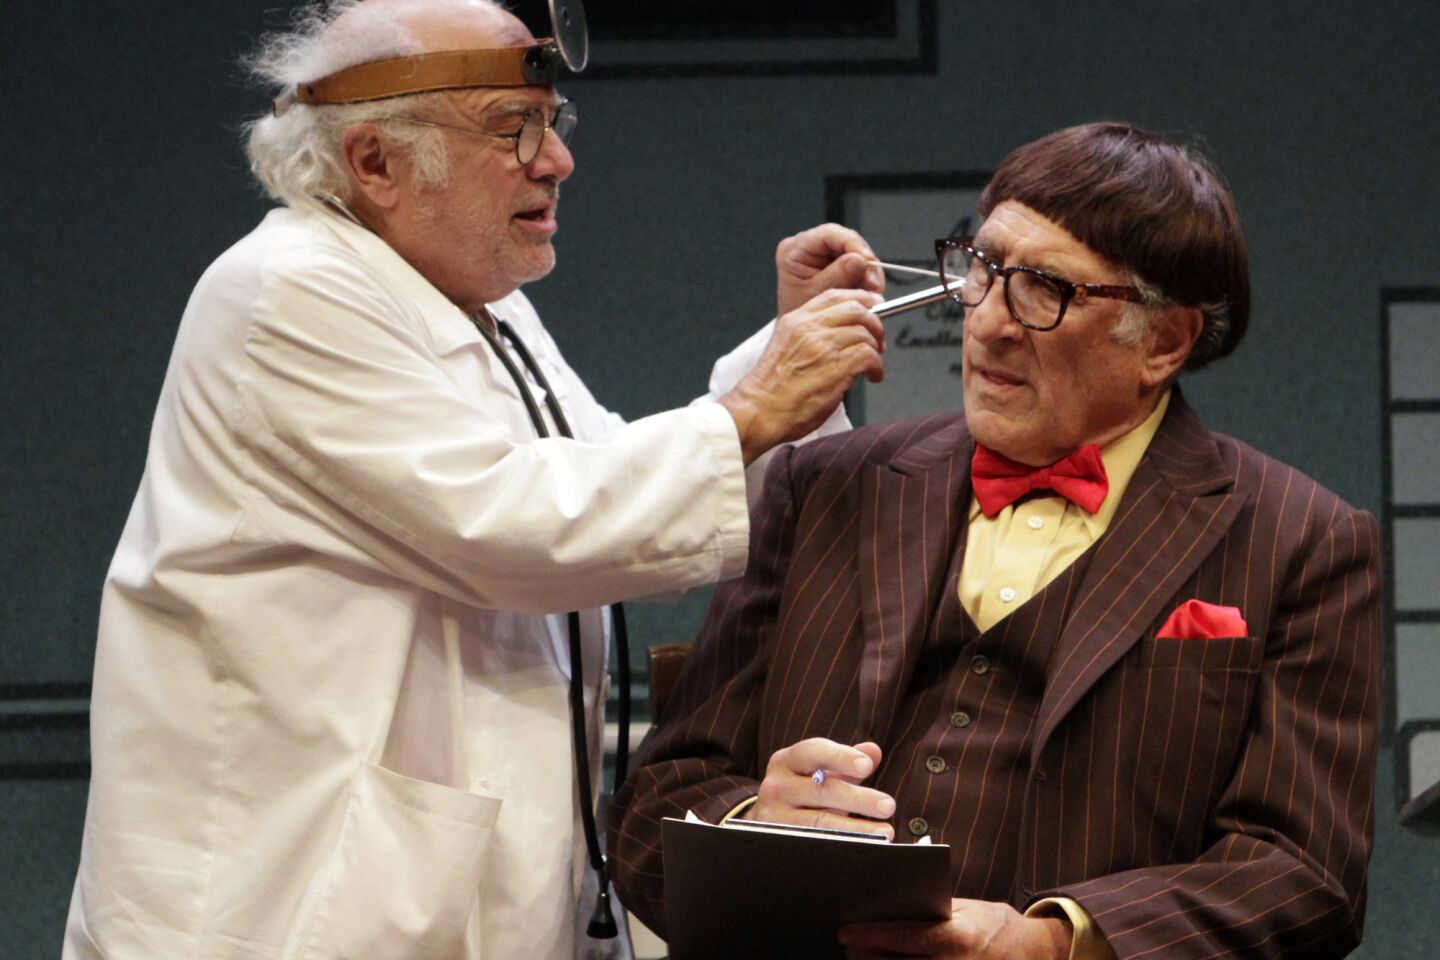 Arts and culture in pictures by The Times | 'The Sunshine Boys'